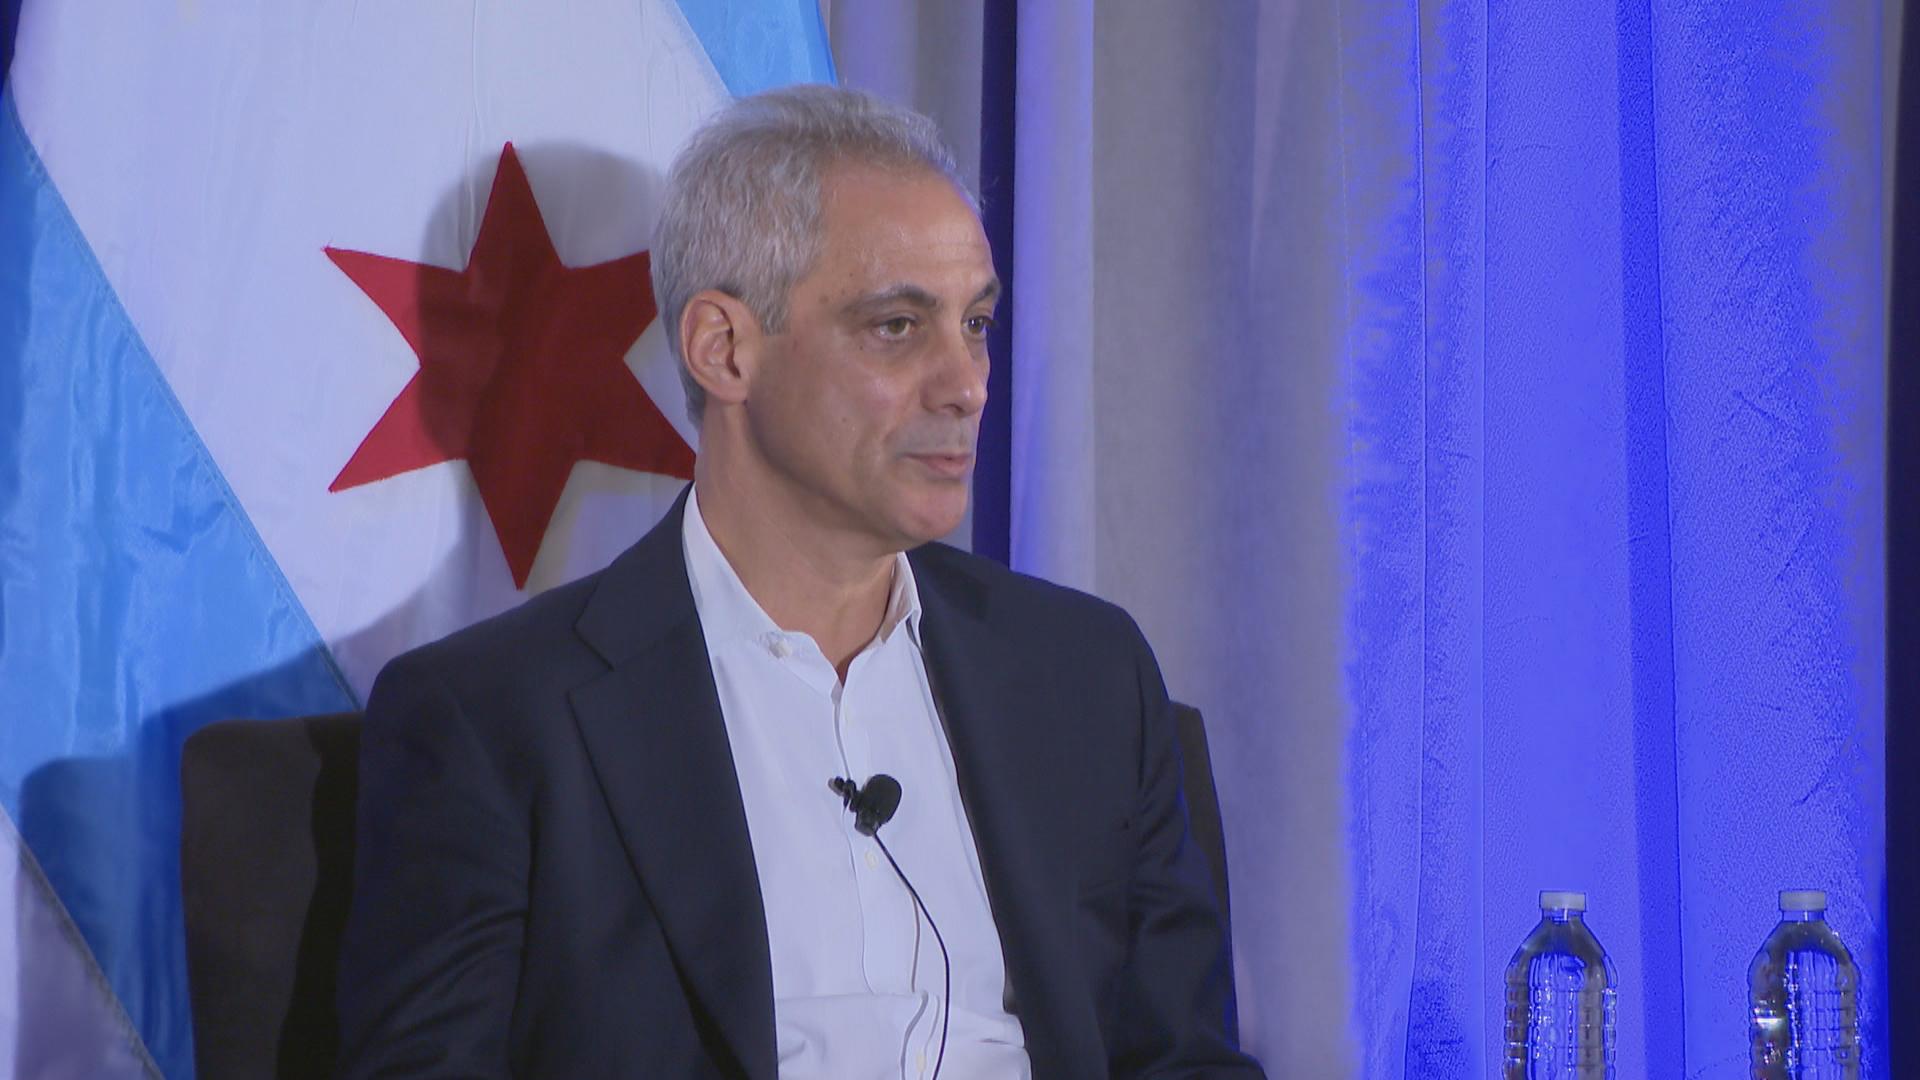 Mayor Rahm Emanuel speaks Thursday at the Chicago Cultural Center, where Chicago Public Schools was recognized as one of the College Board’s AP Districts of the Year. (Chicago Tonight)